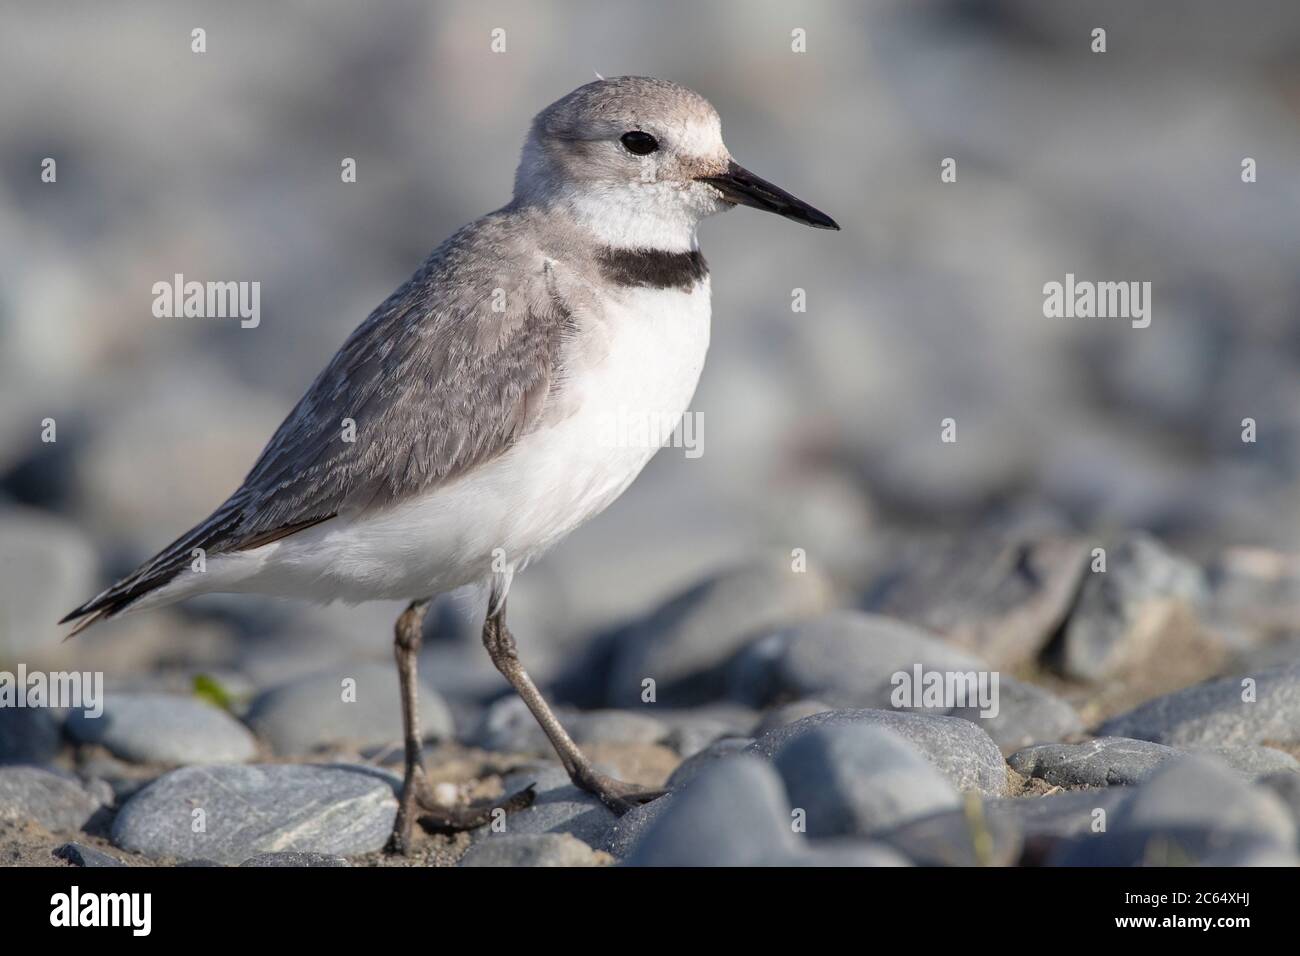 Adult Wrybill (Anarhynchus frontalis) standing in a river bed in Glentanner Park, South Island, New Zealand. The only species of bird in the world wit Stock Photo